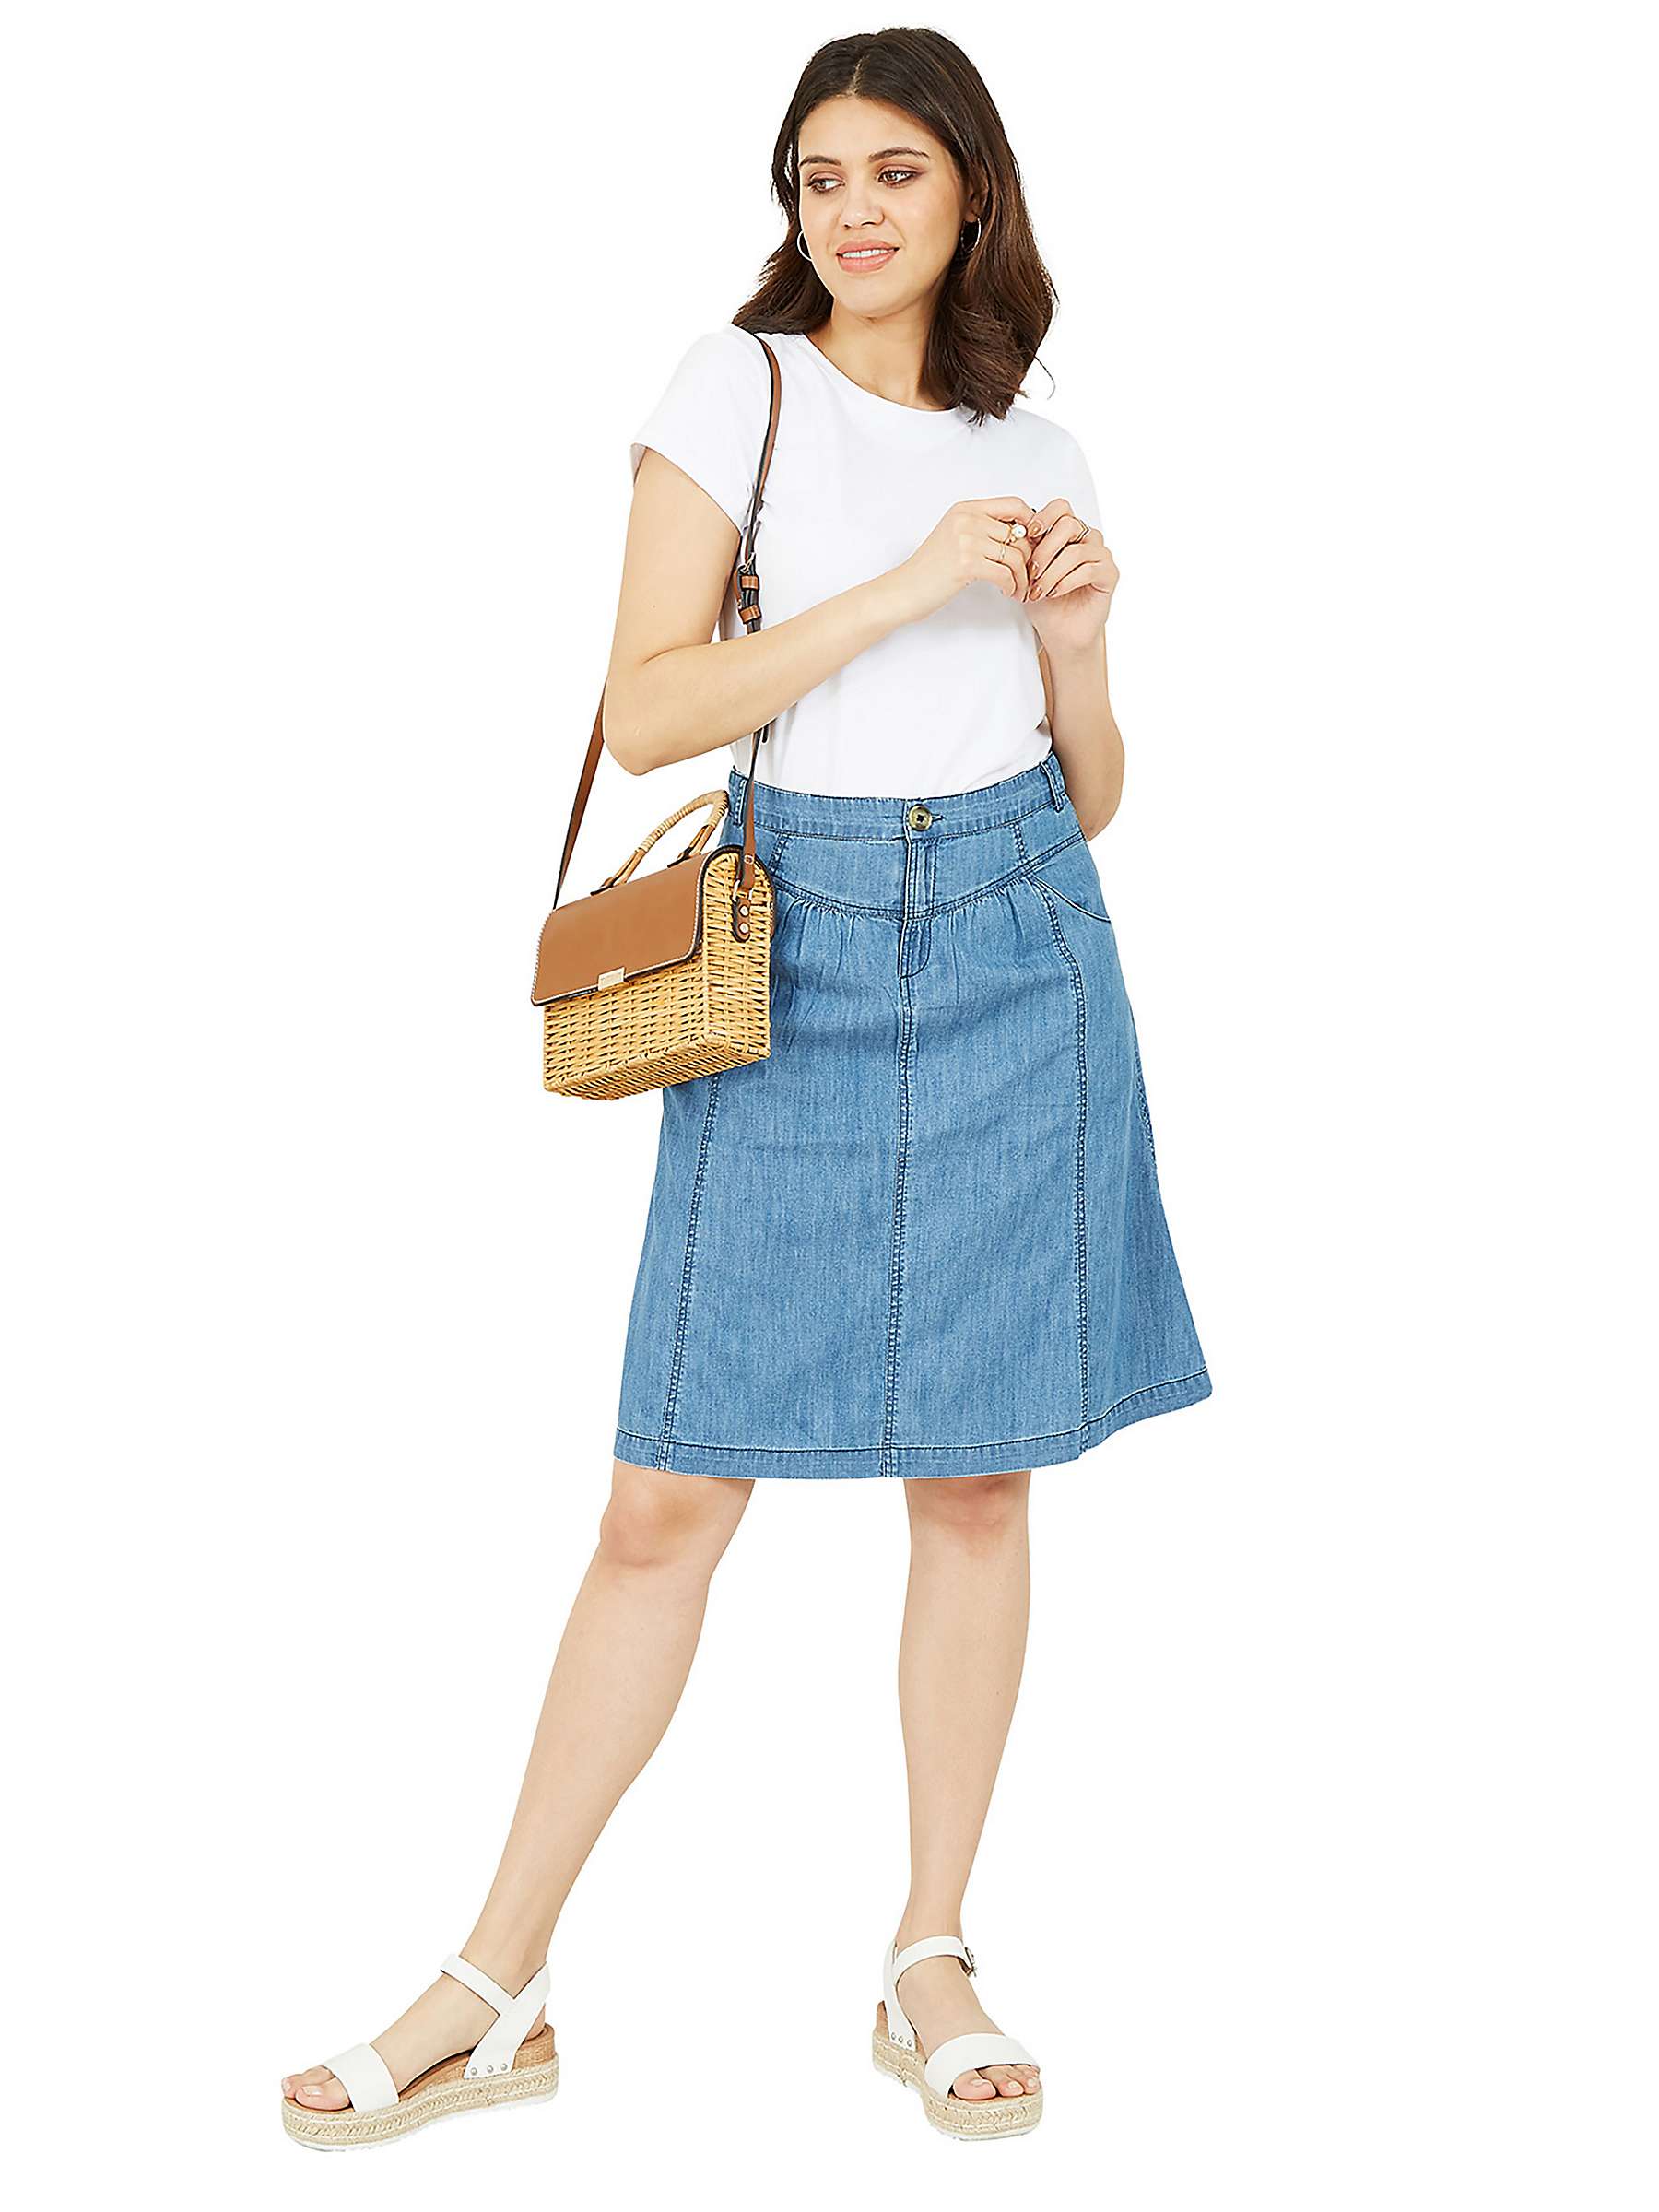 Buy Yumi Chambray A-Line Skirt, Light Blue Online at johnlewis.com